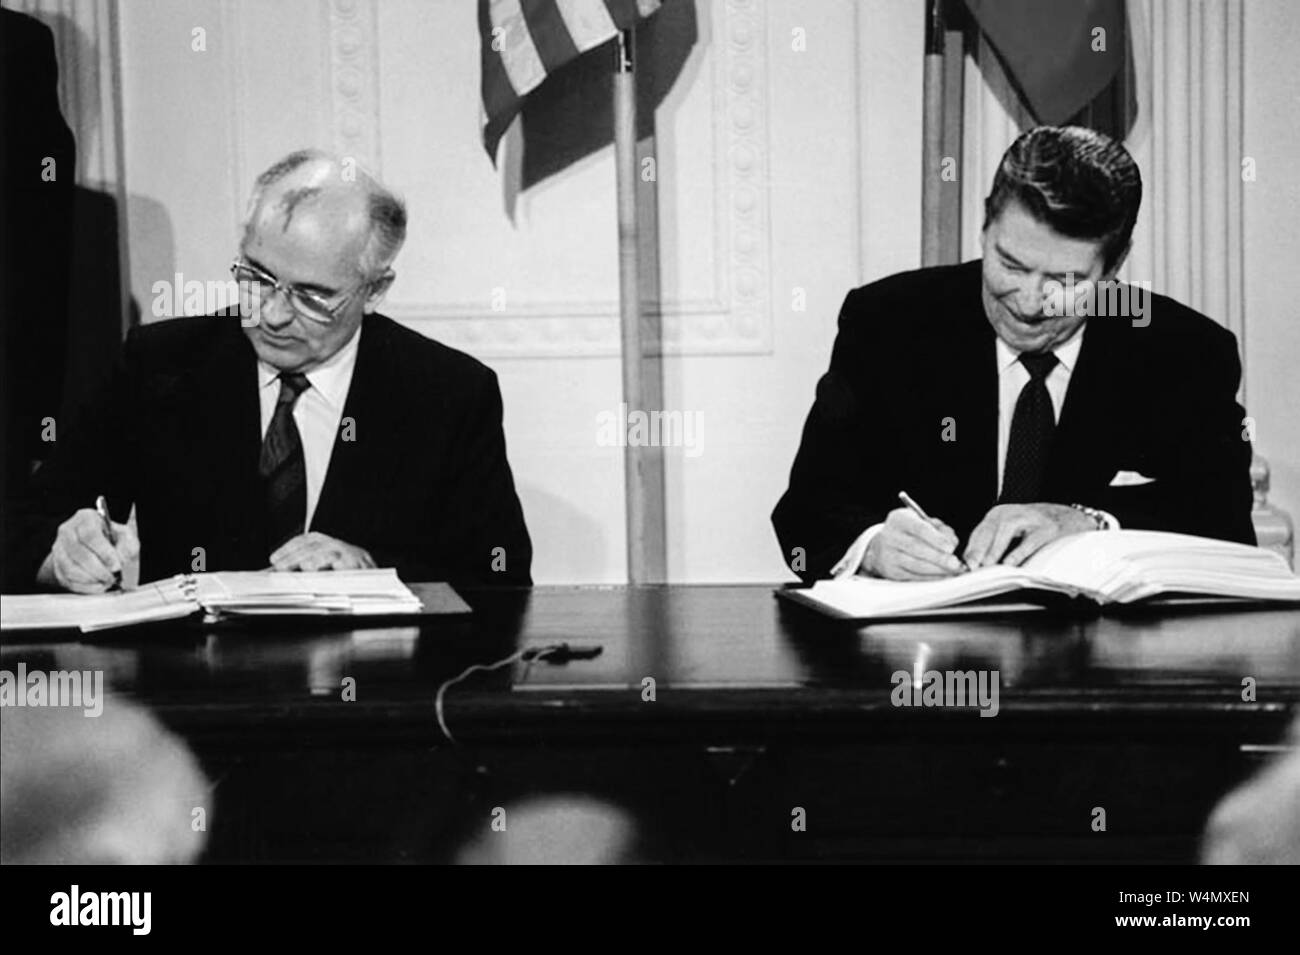 United States President Ronald Reagan and Soviet General Secretary Mikhail Gorbachev signing the Intermediate-Range Nuclear Forces (INF) Treaty on December 8, 1987 in the East Room of the White House. Stock Photo